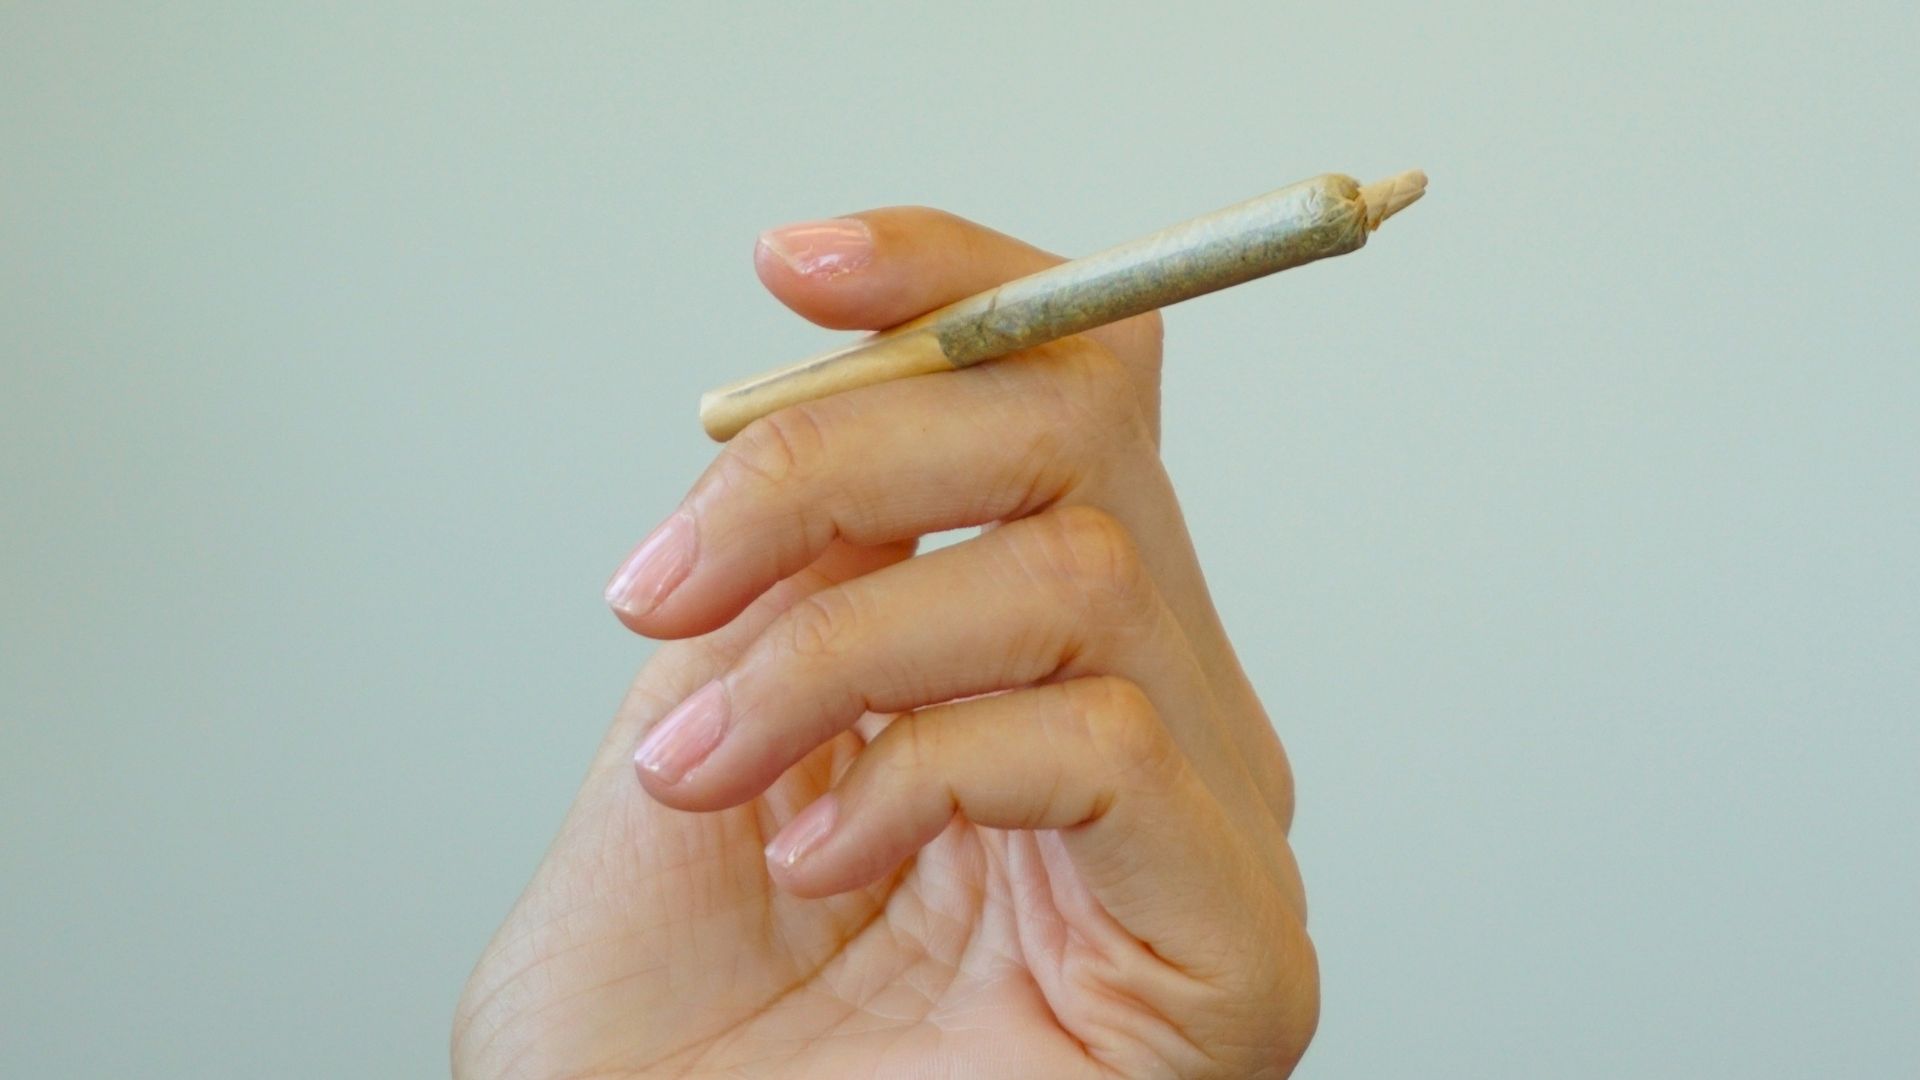 A close up of a hand holding a joint against a light blue background. The joint contains THC cannabis flower.